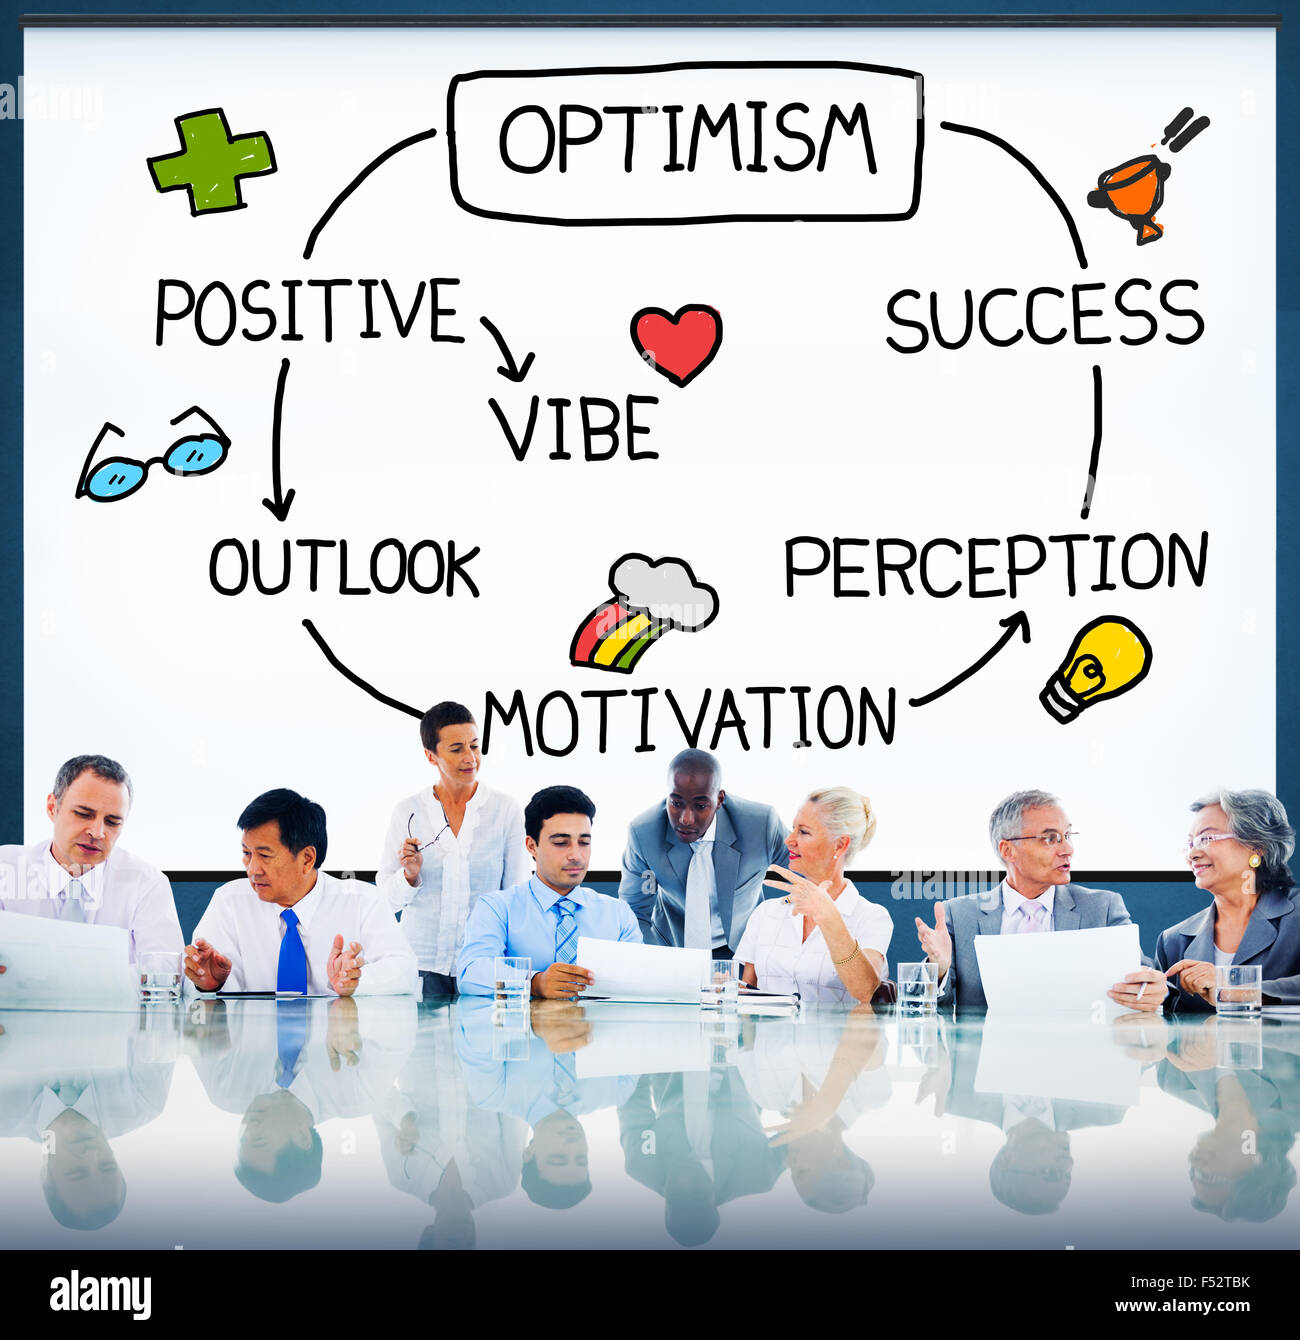 Optimism Positive Outlook Vibe Perception Vision Concept Stock Photo